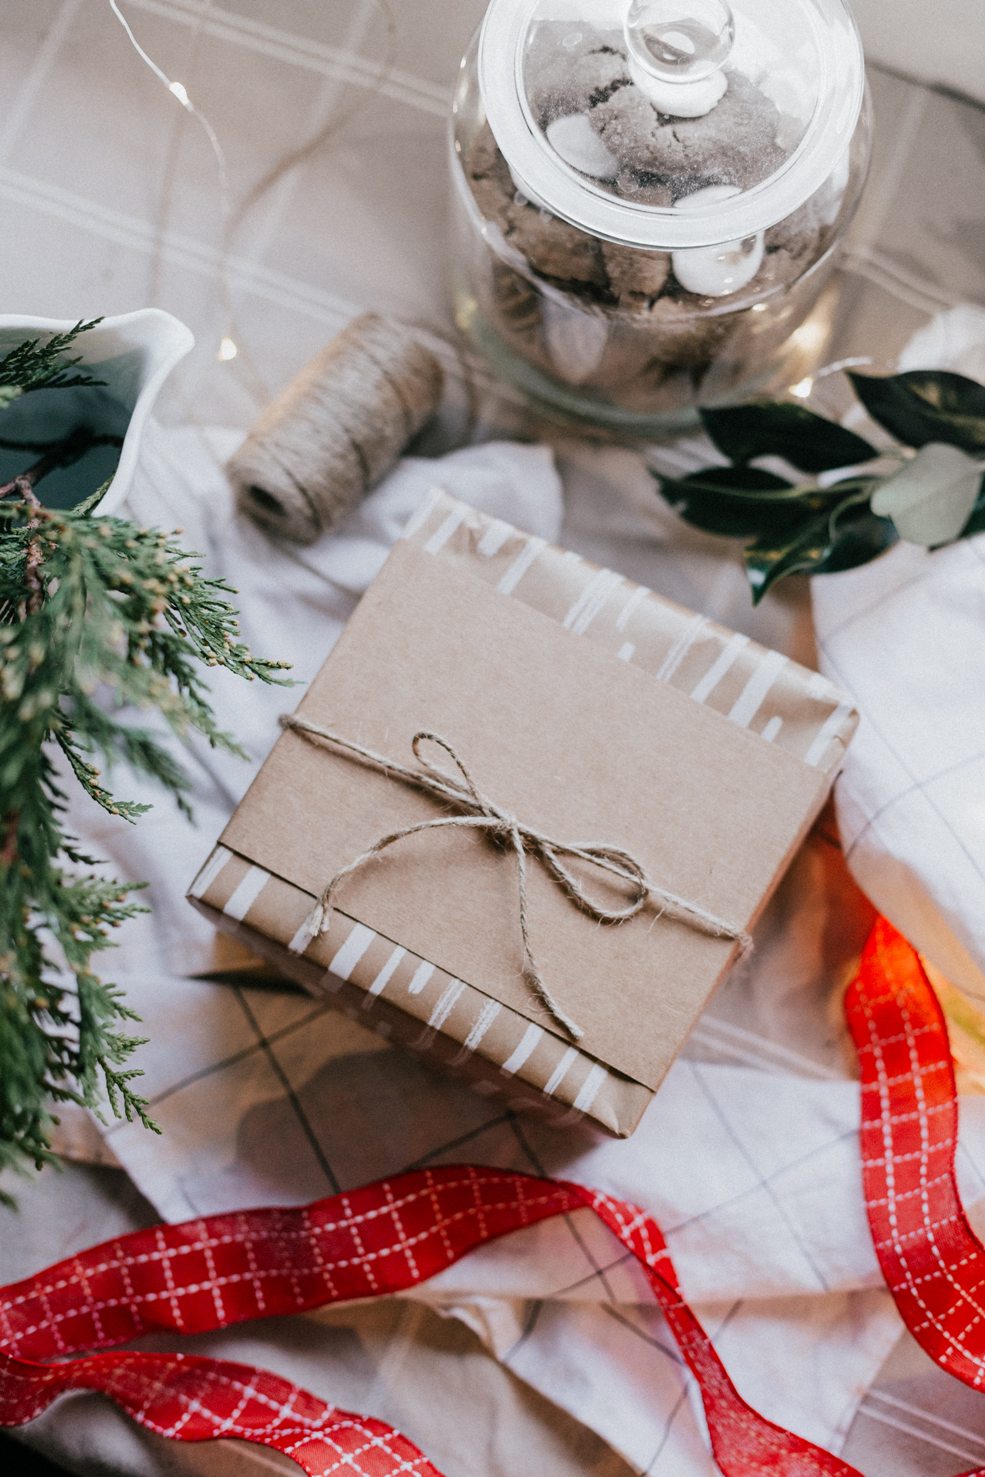 Rethinking our holiday gift-giving attitudes